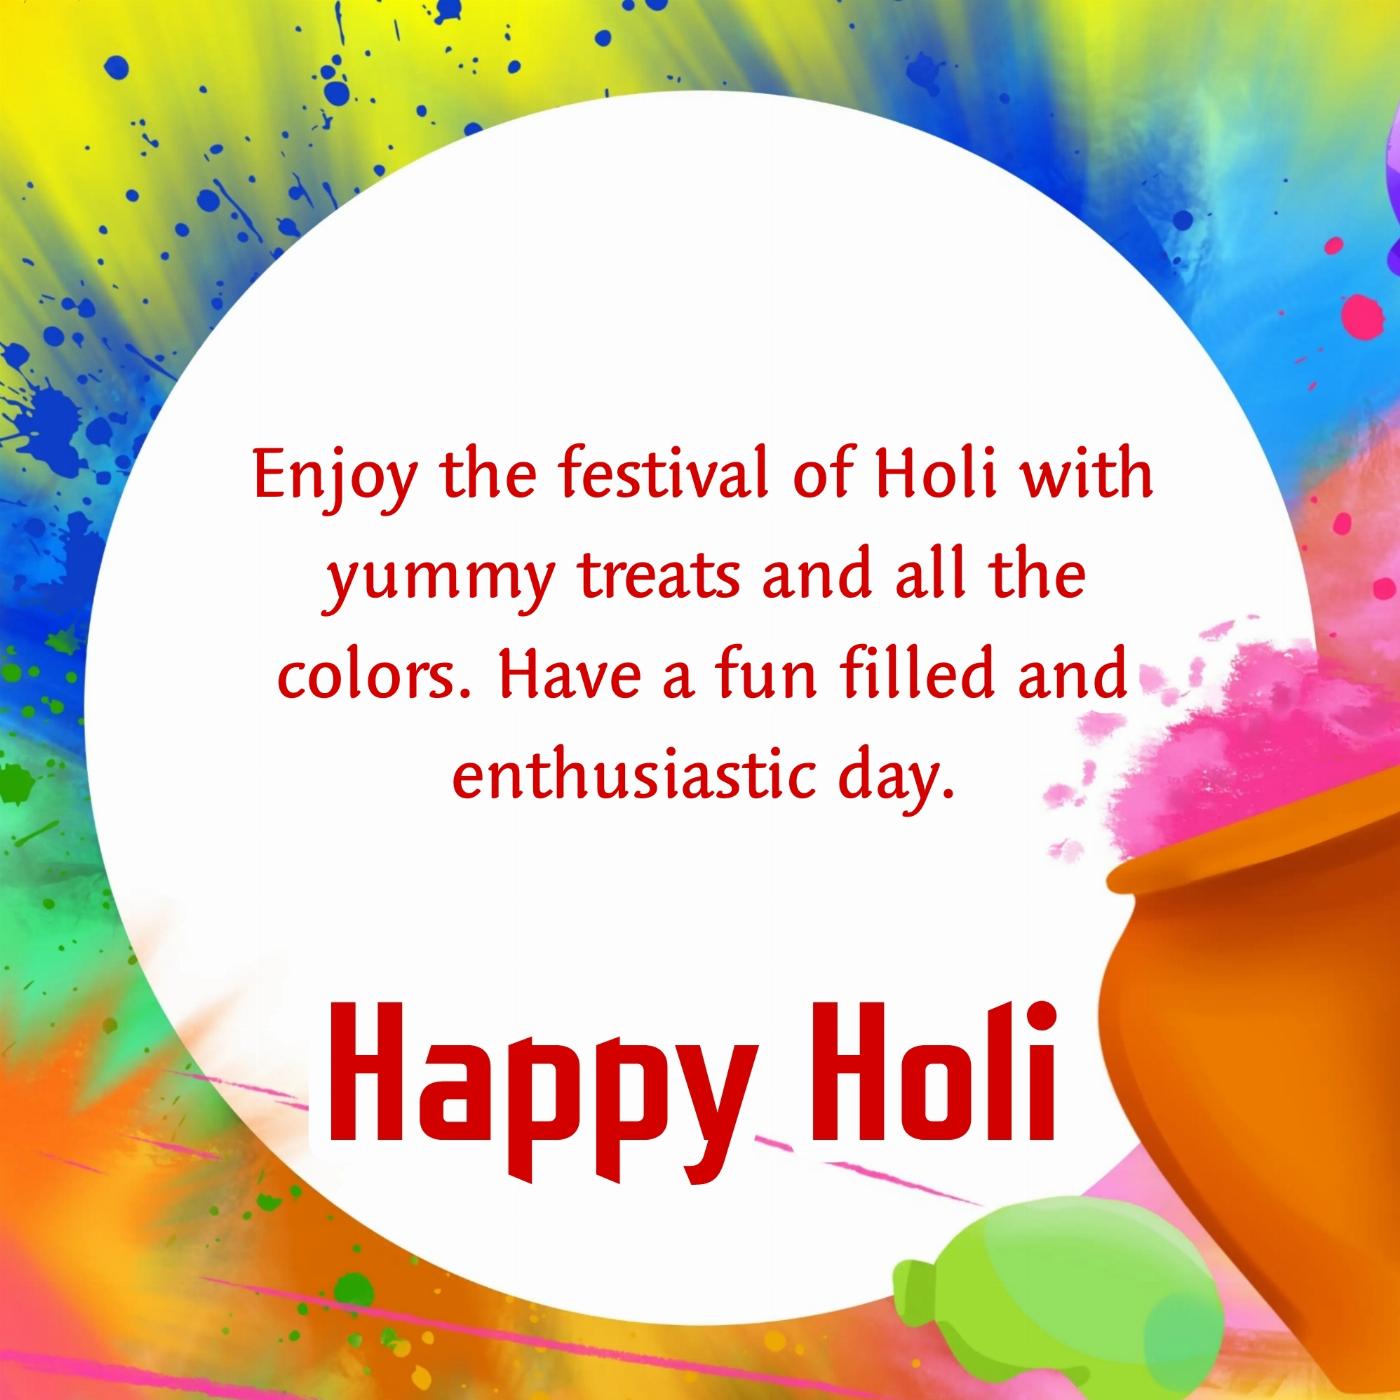 Enjoy the festival of Holi with yummy treats and all the colors